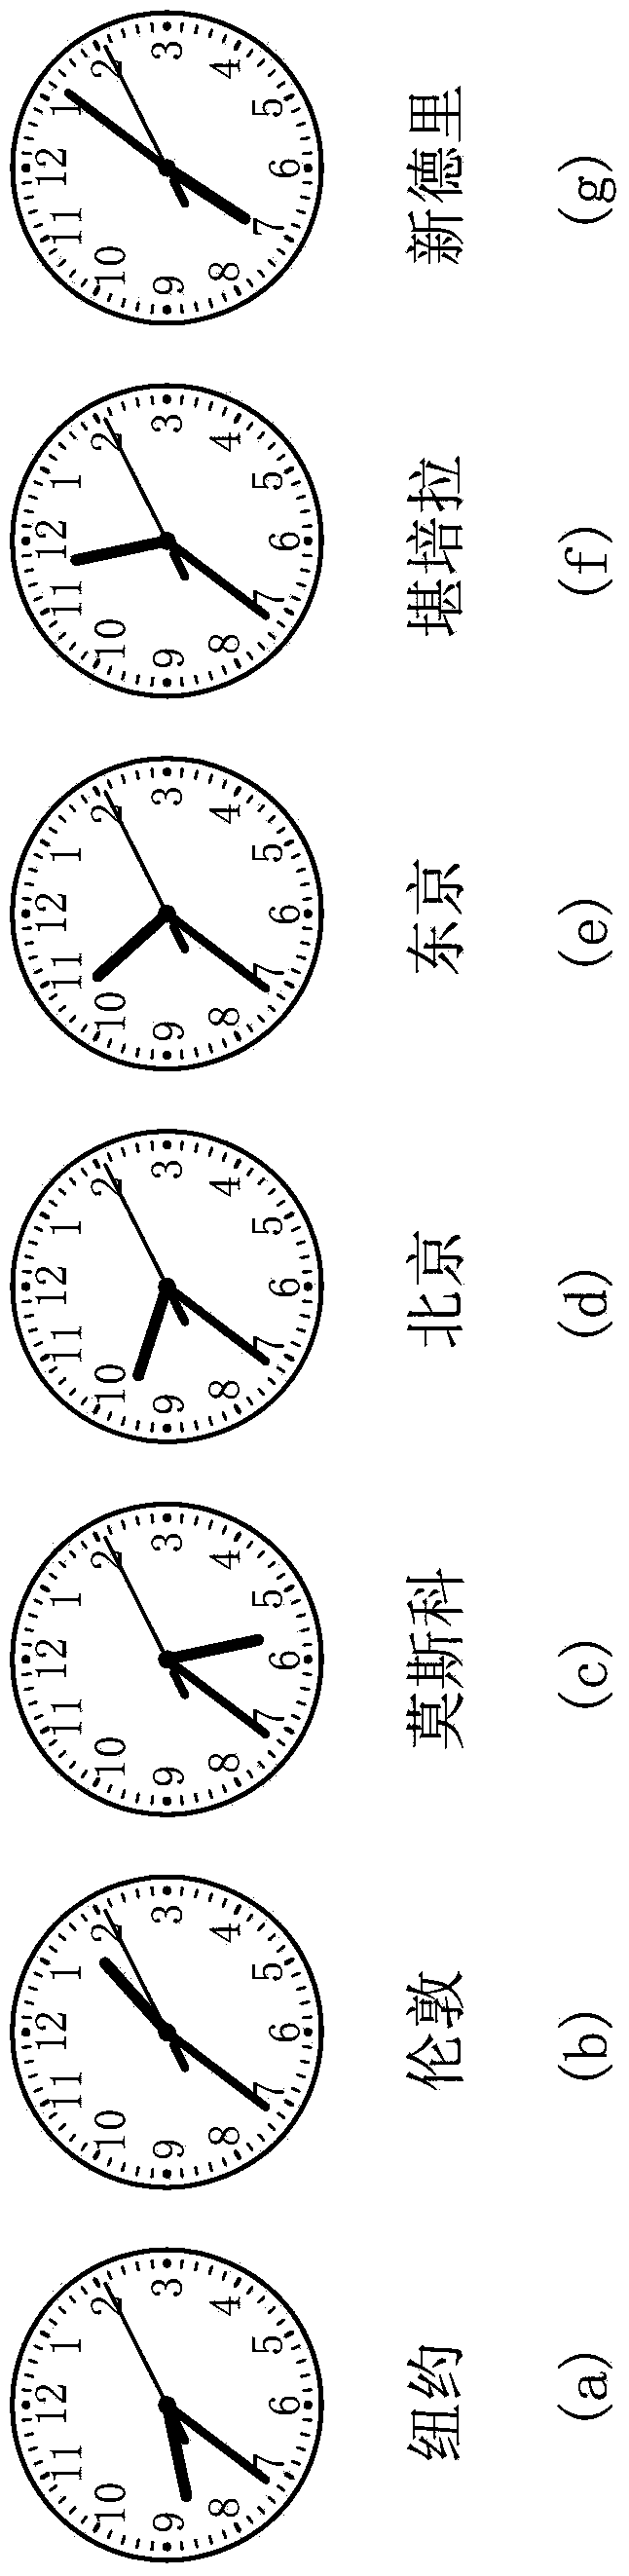 Clock capable of indicating time of other time zones